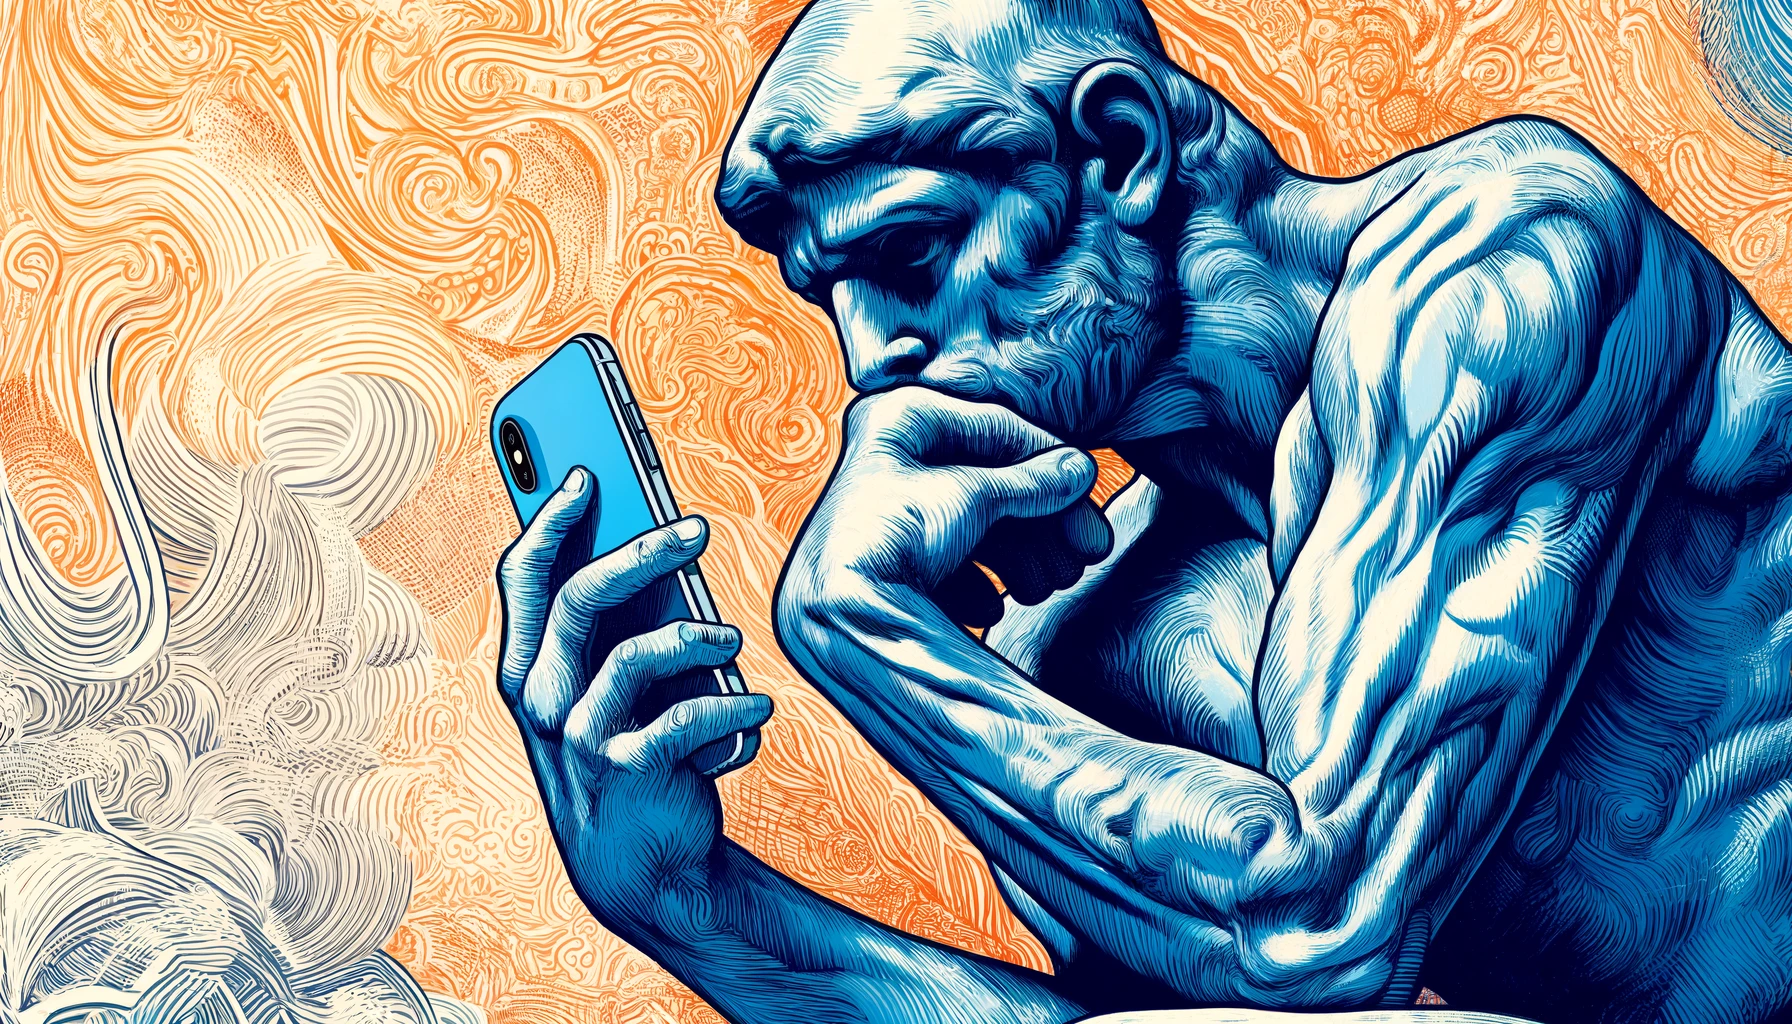 The Thinker, looking at a smartphone